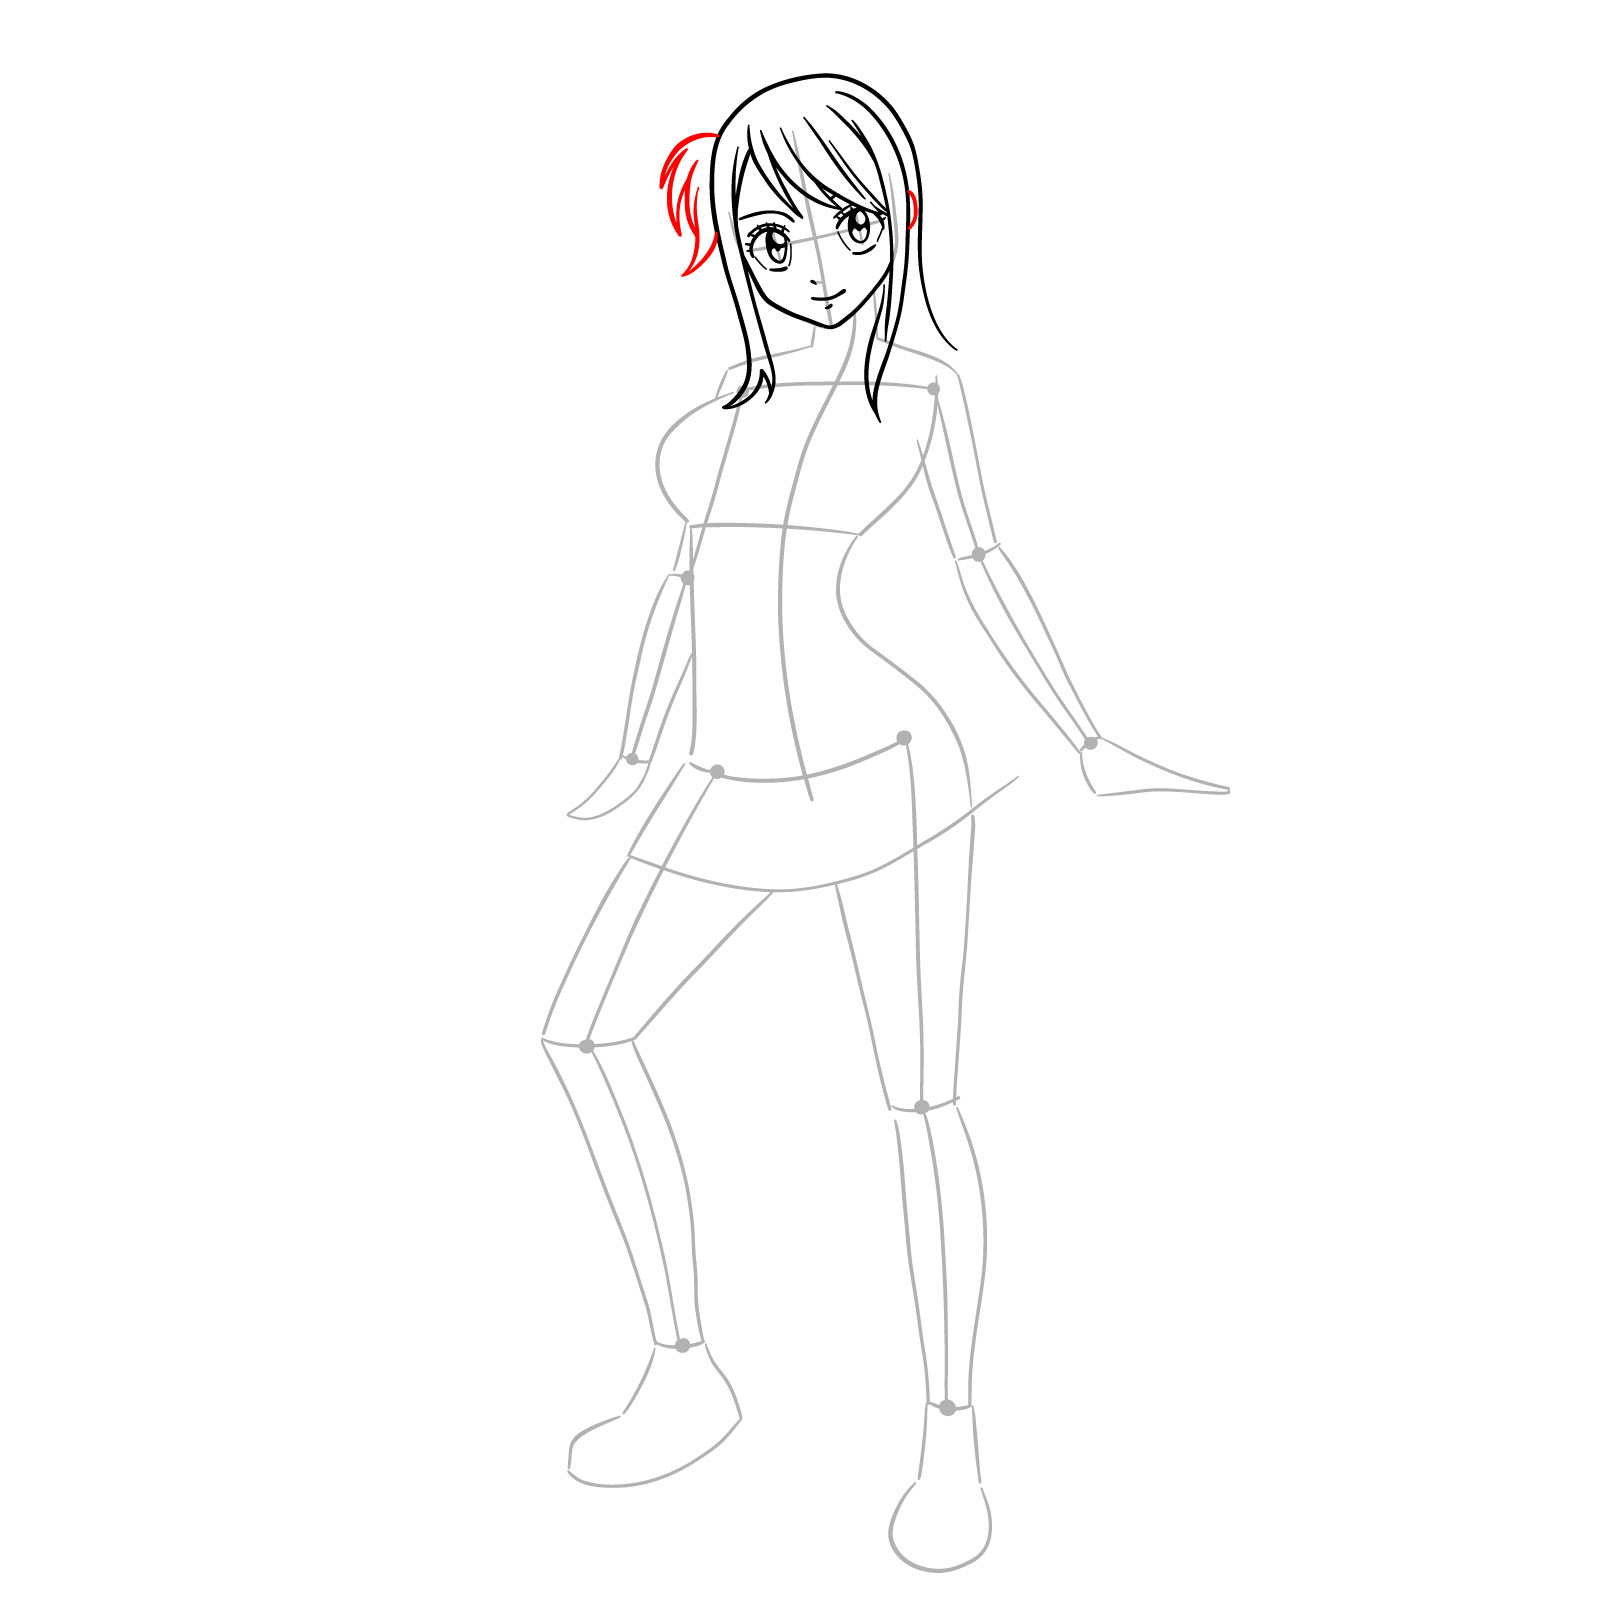 How to draw Lucy Heartfilia in a new outfit - step 11